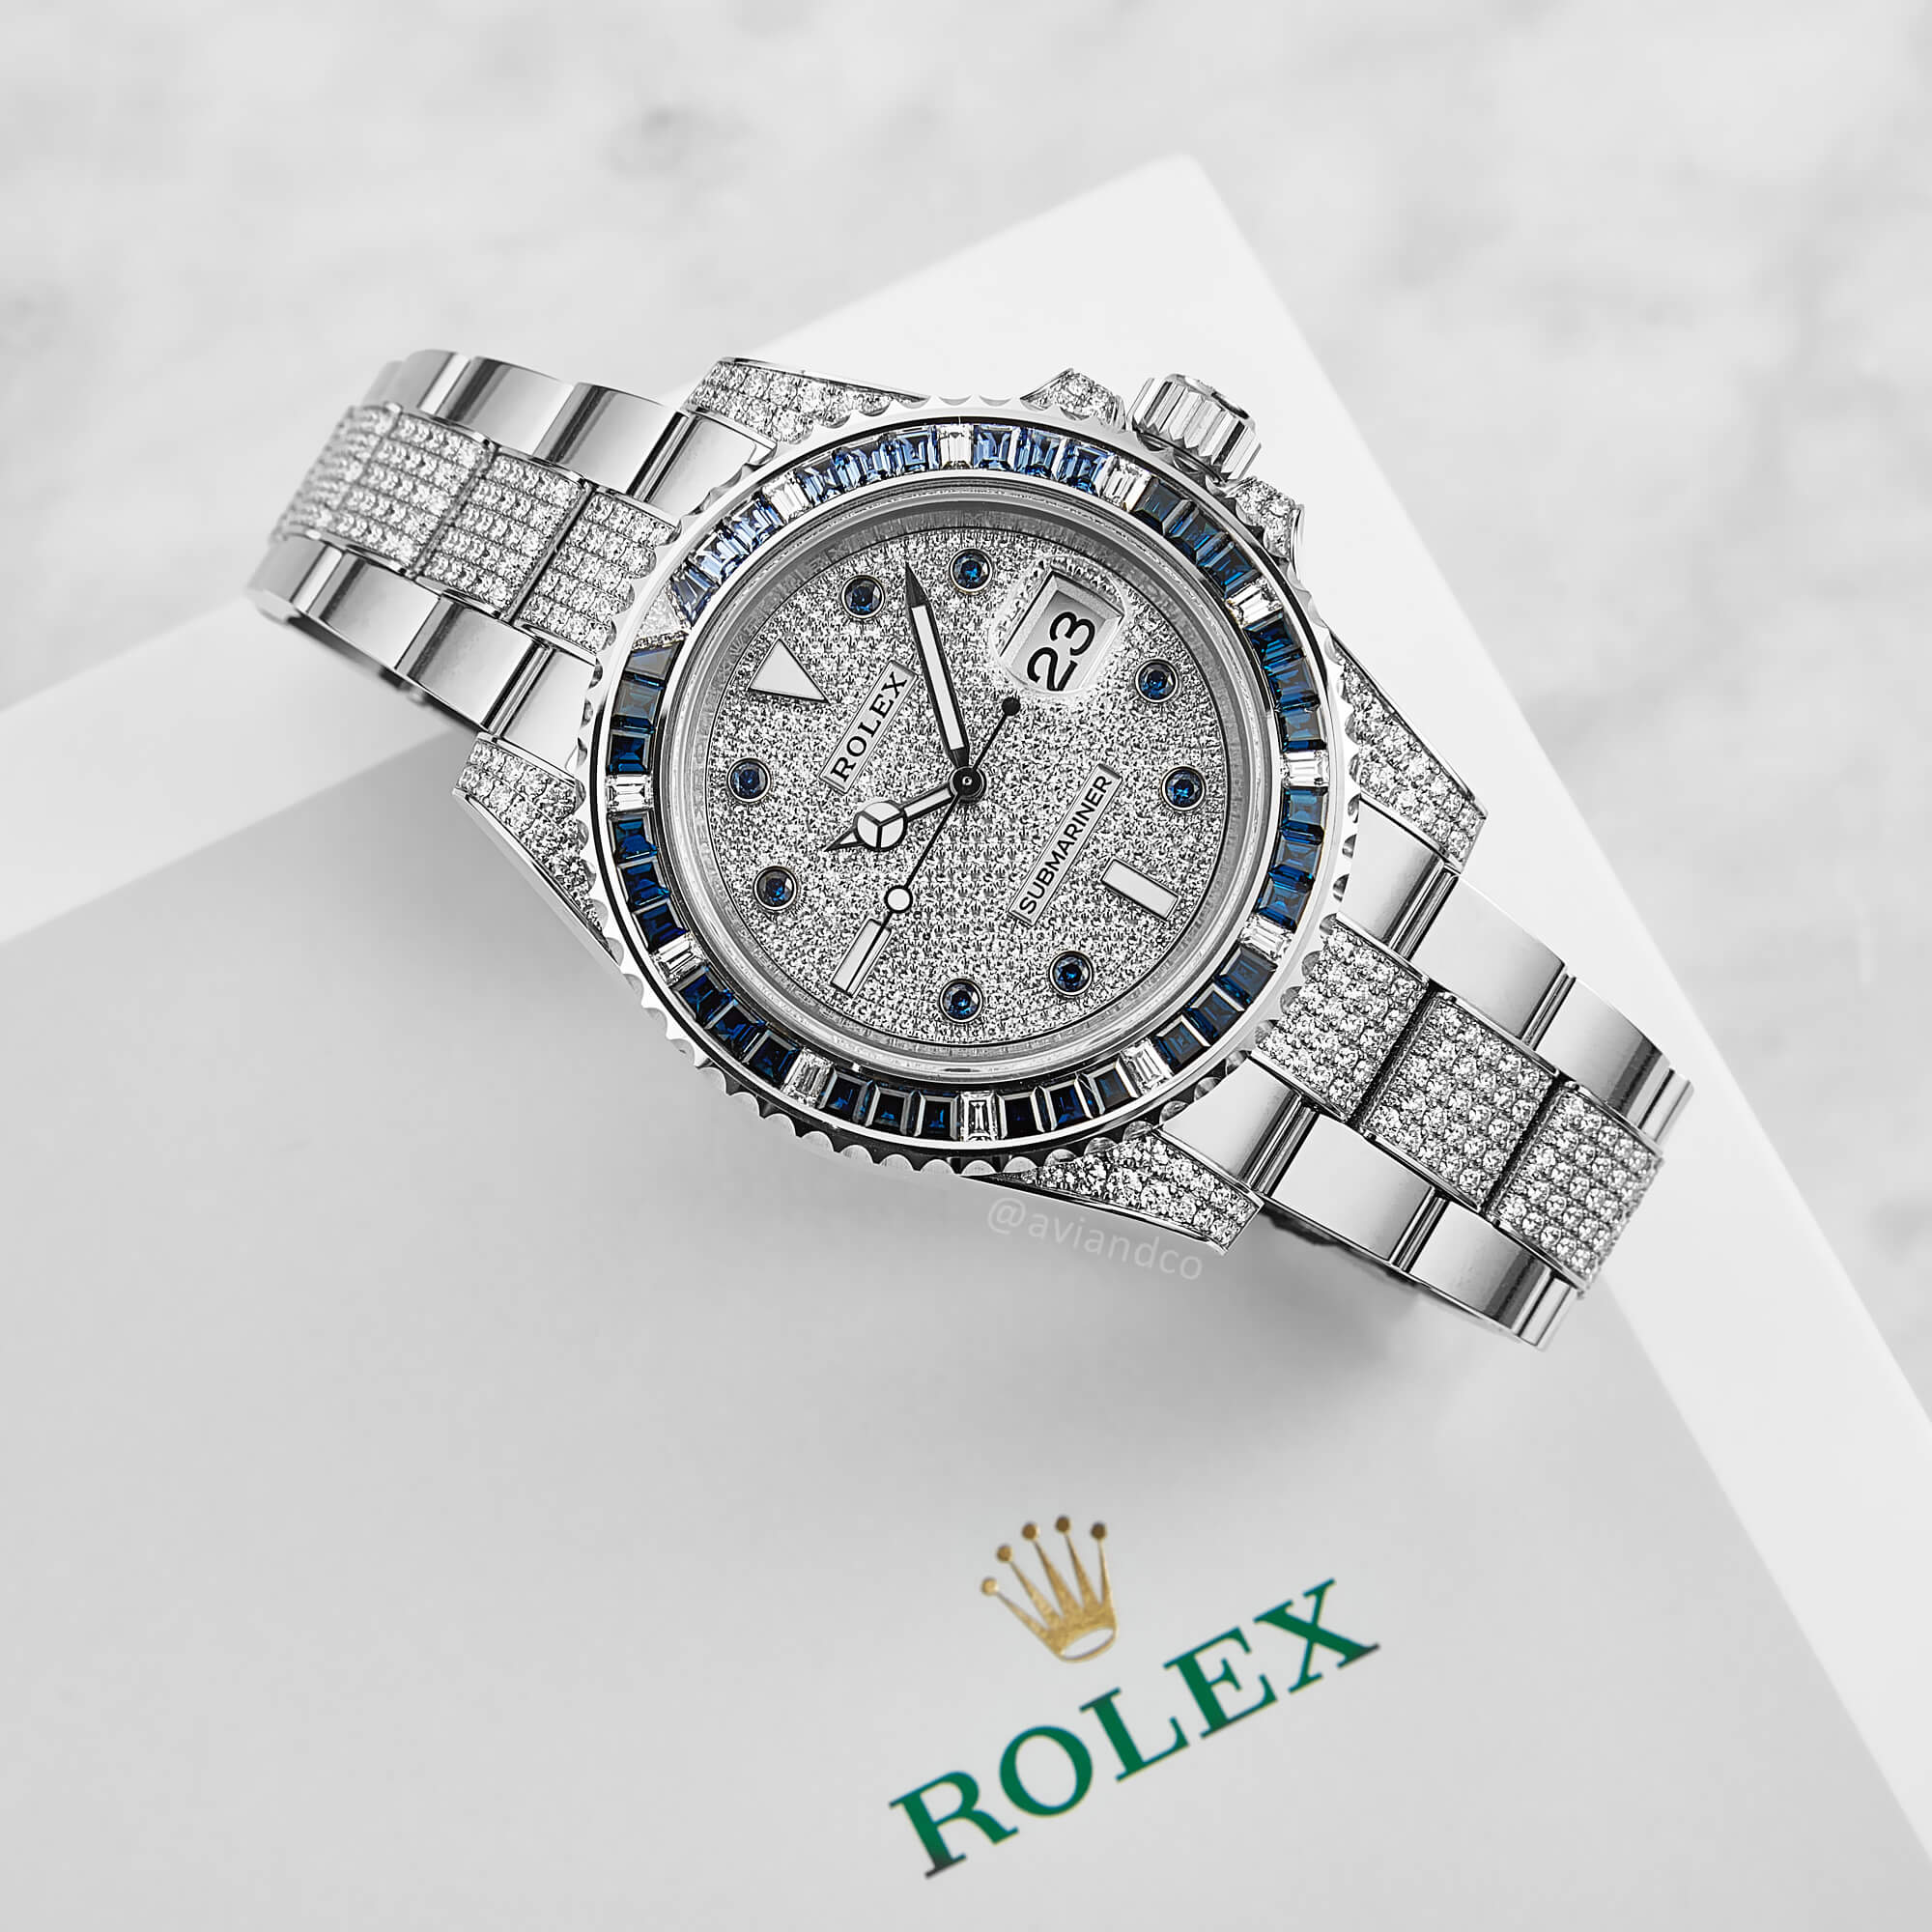 18L White Gold 40 mm Timepiece Set with Diamonds and Sapphires with an Automatic Movement and Date Function on a White Background, a Perfect Example of Water Resistance in a Rolex Watch.